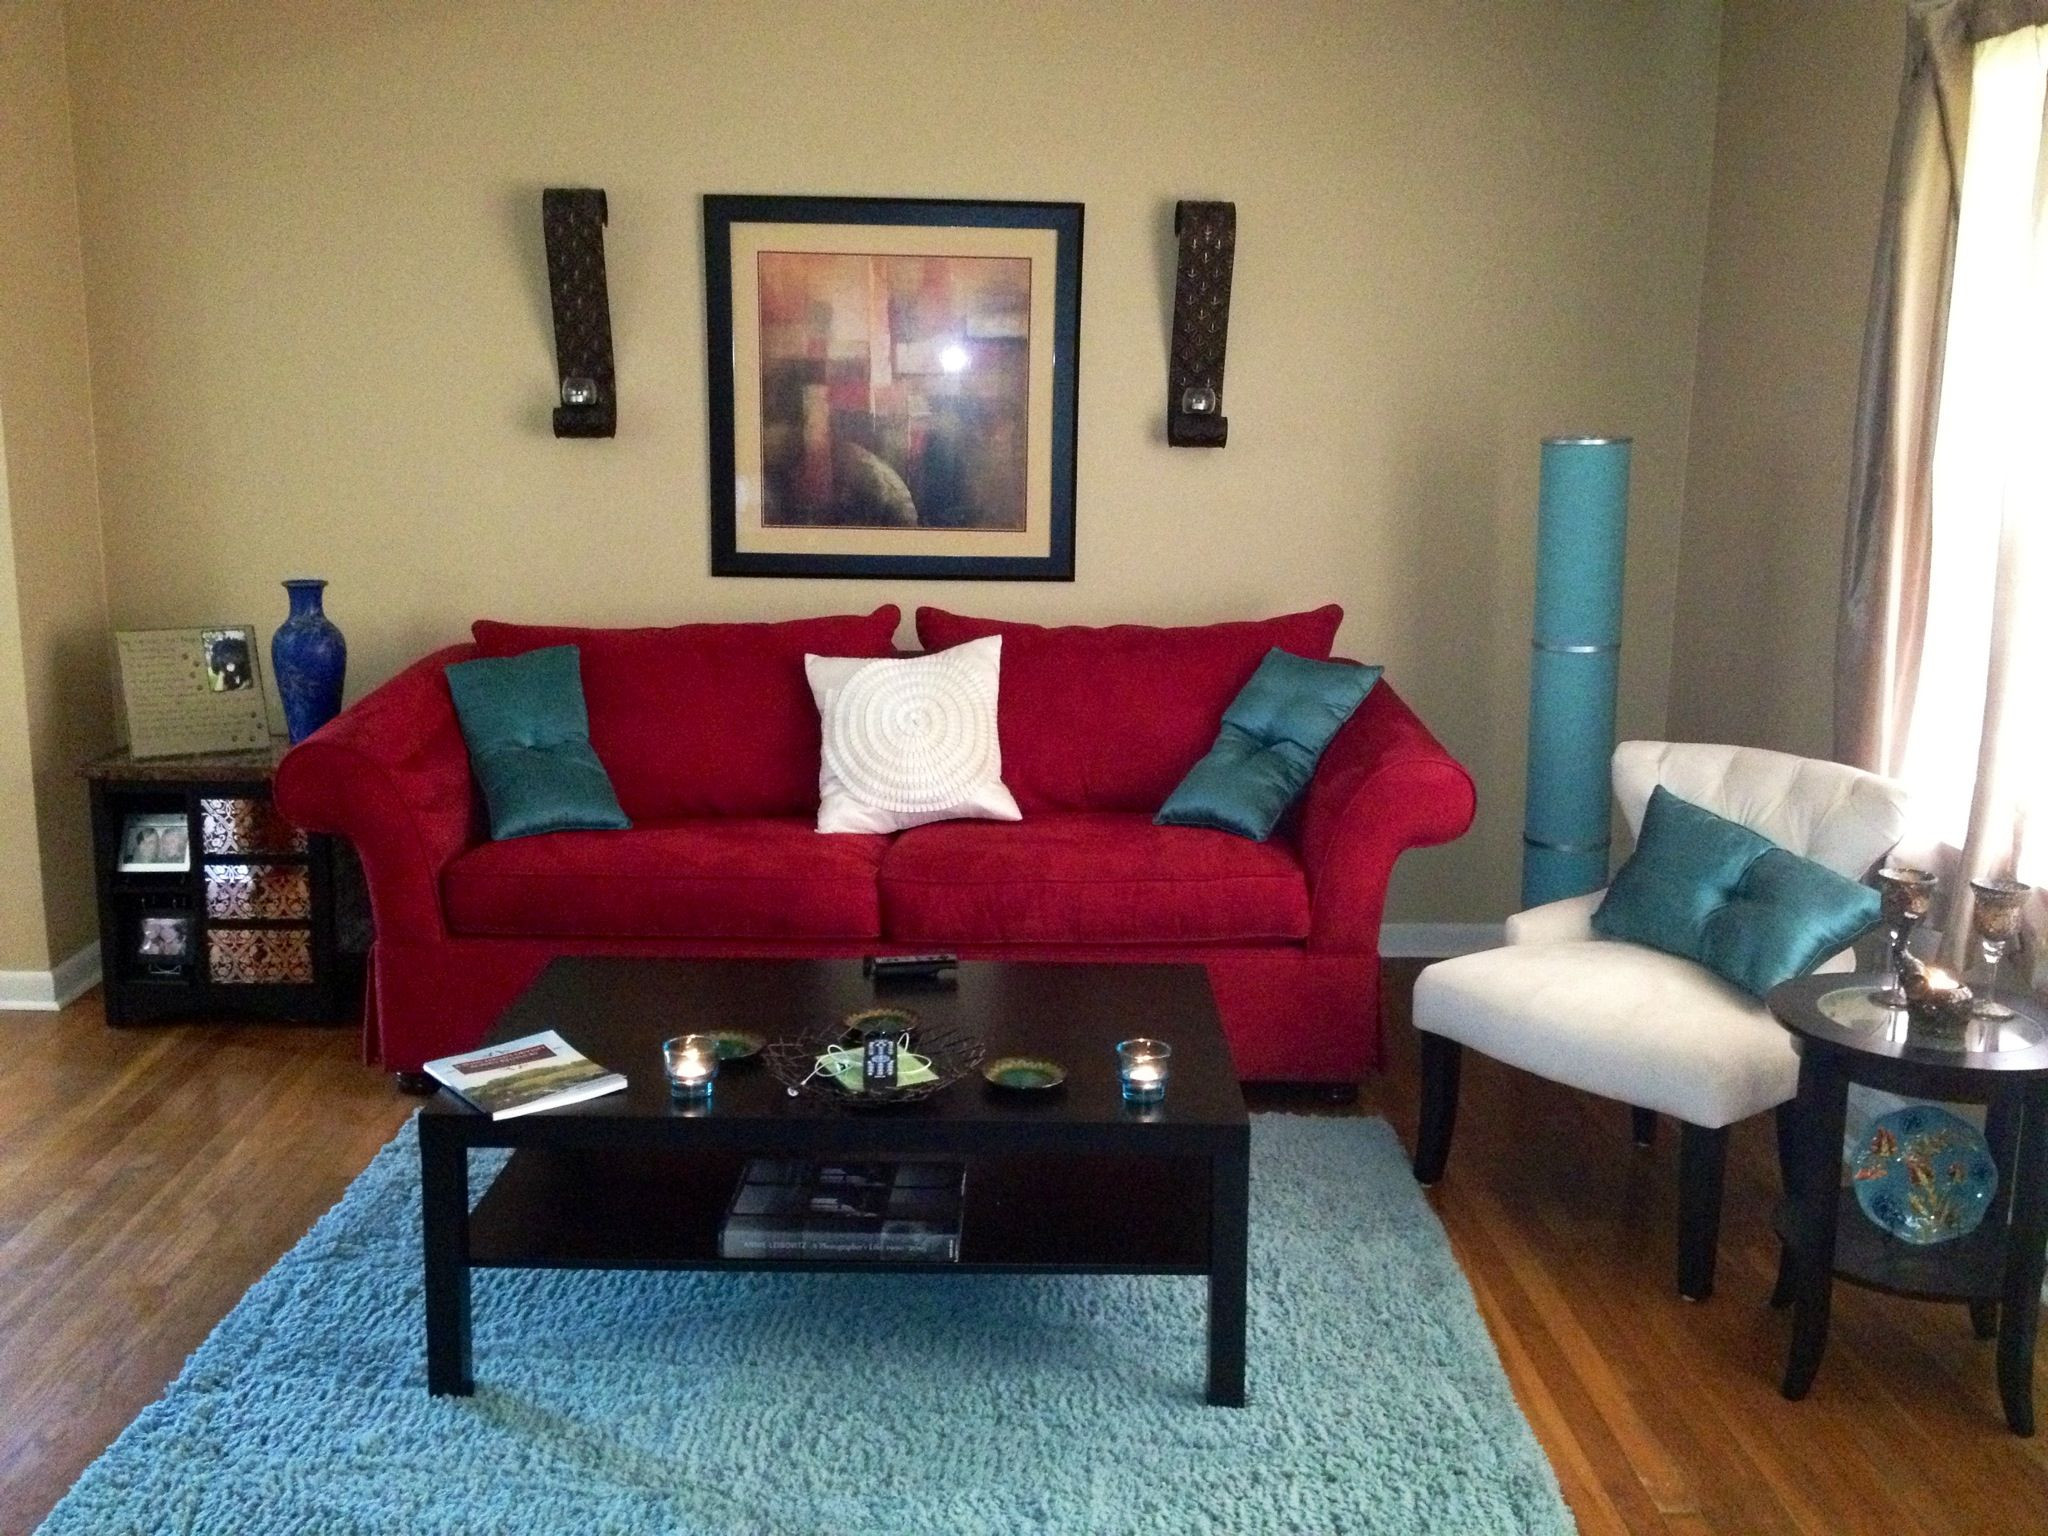 Red Couches Living Room Ideas
 My living room Red aqua and ivory